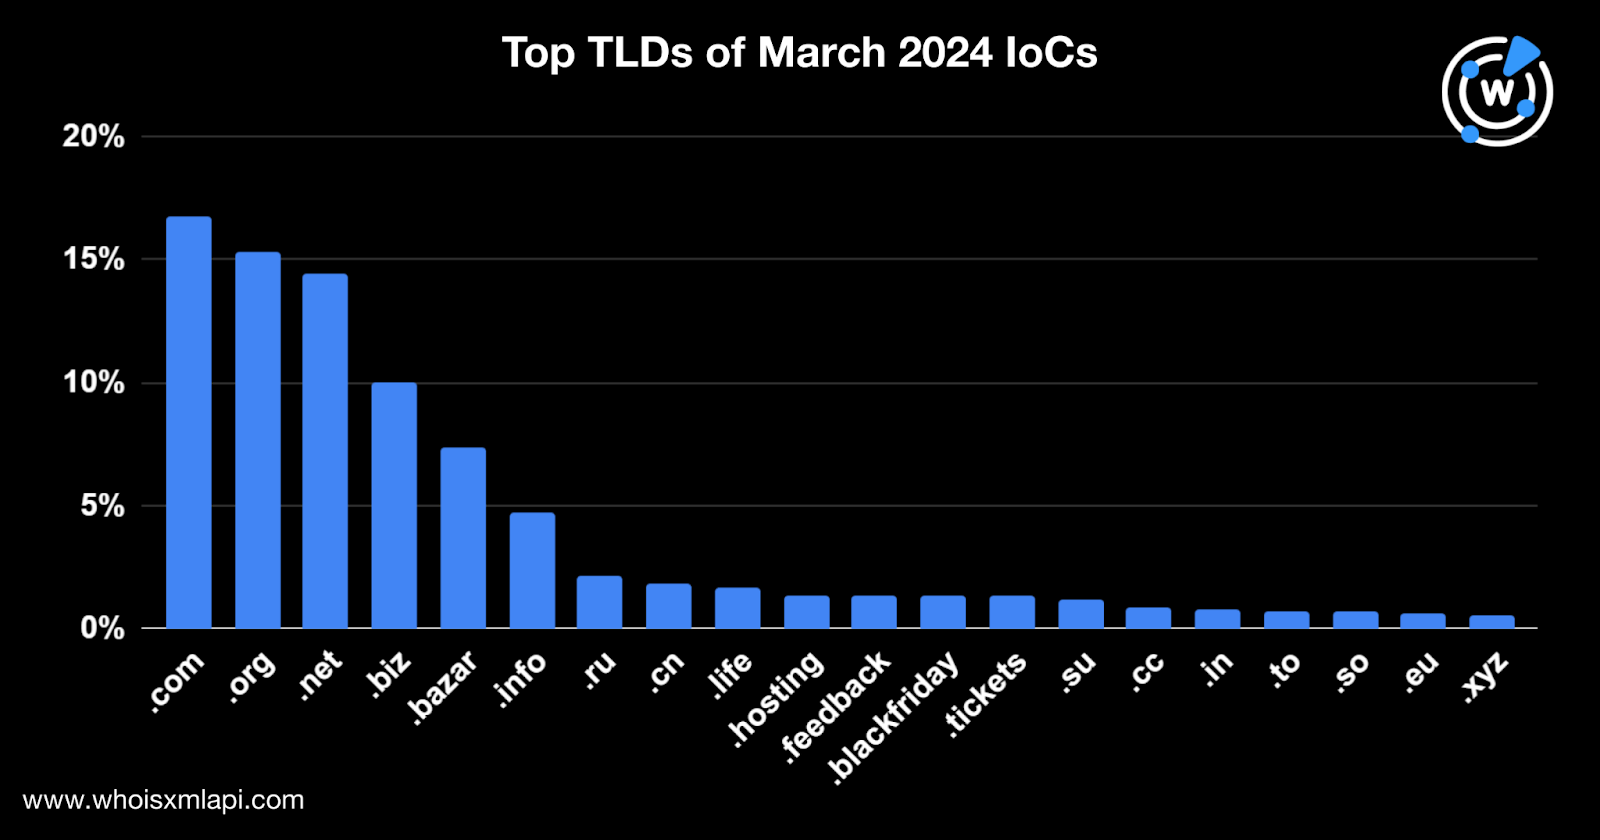 Top TLDs of March 2024 IoCs